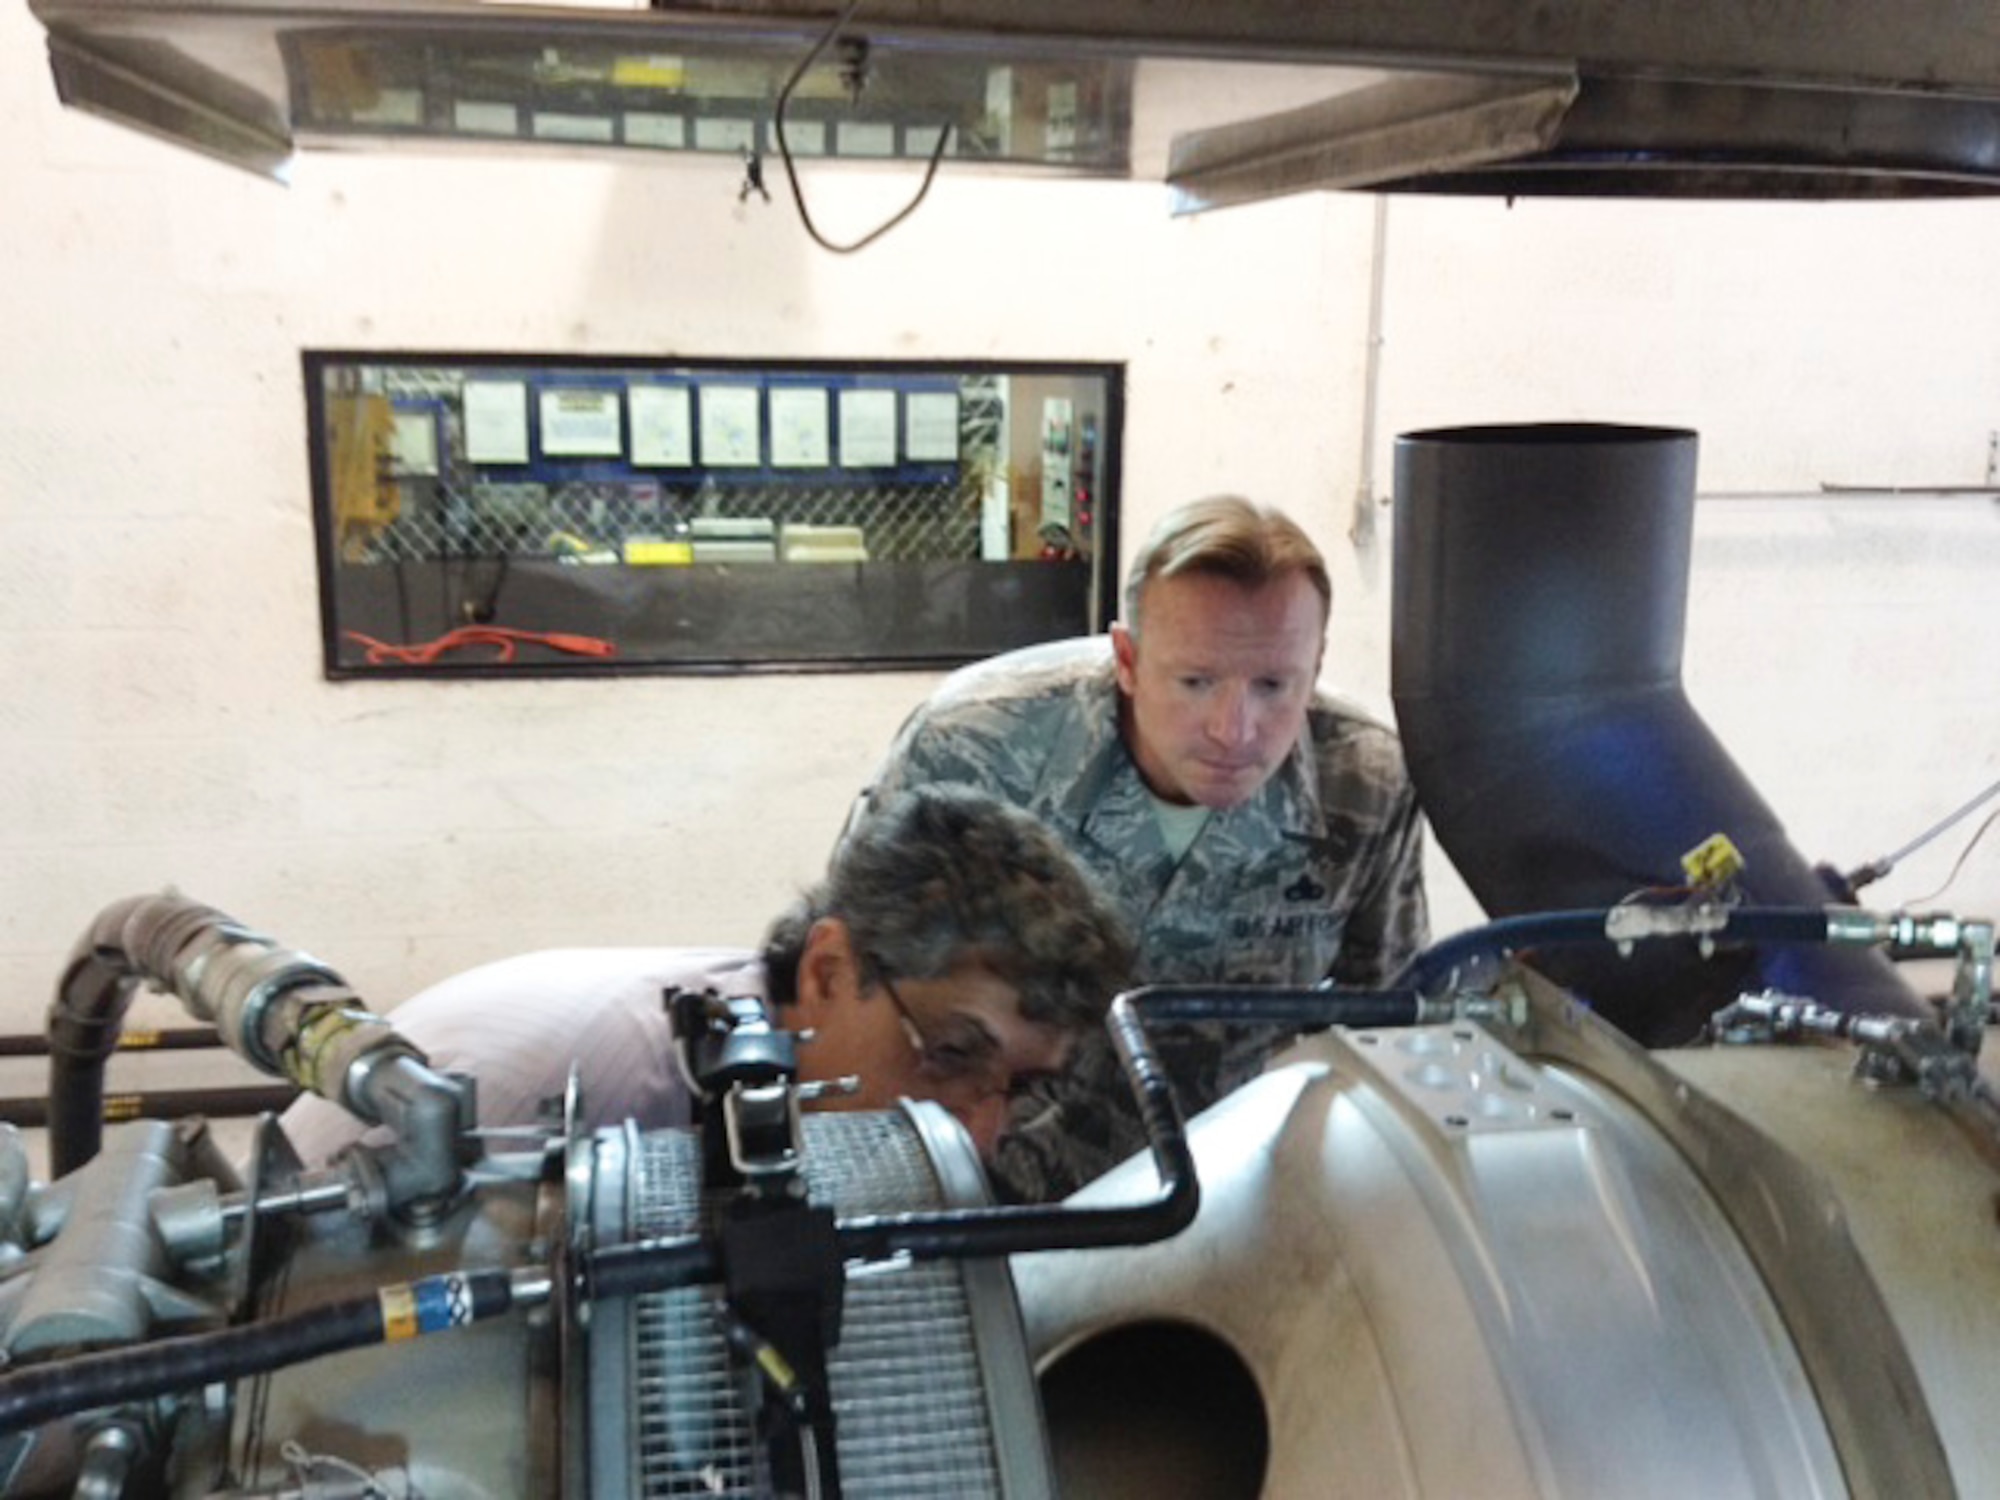 Master Sgt. Jeremy Jacobs, 12th Air Force (Air Forces Southern) Tactical Aircraft Manager, observes a demonstration of different techniques for performing proper maintenance procedures on the PT6A turboprop engine on Dec. 15, 2014 in Miami, Fl. The PT6A turboprop engine is a powerhouse that offers high performance, reliability and value in its ability to power air craft across multiple platforms and is used by 170 different countries worldwide. (Courtesy Photo)